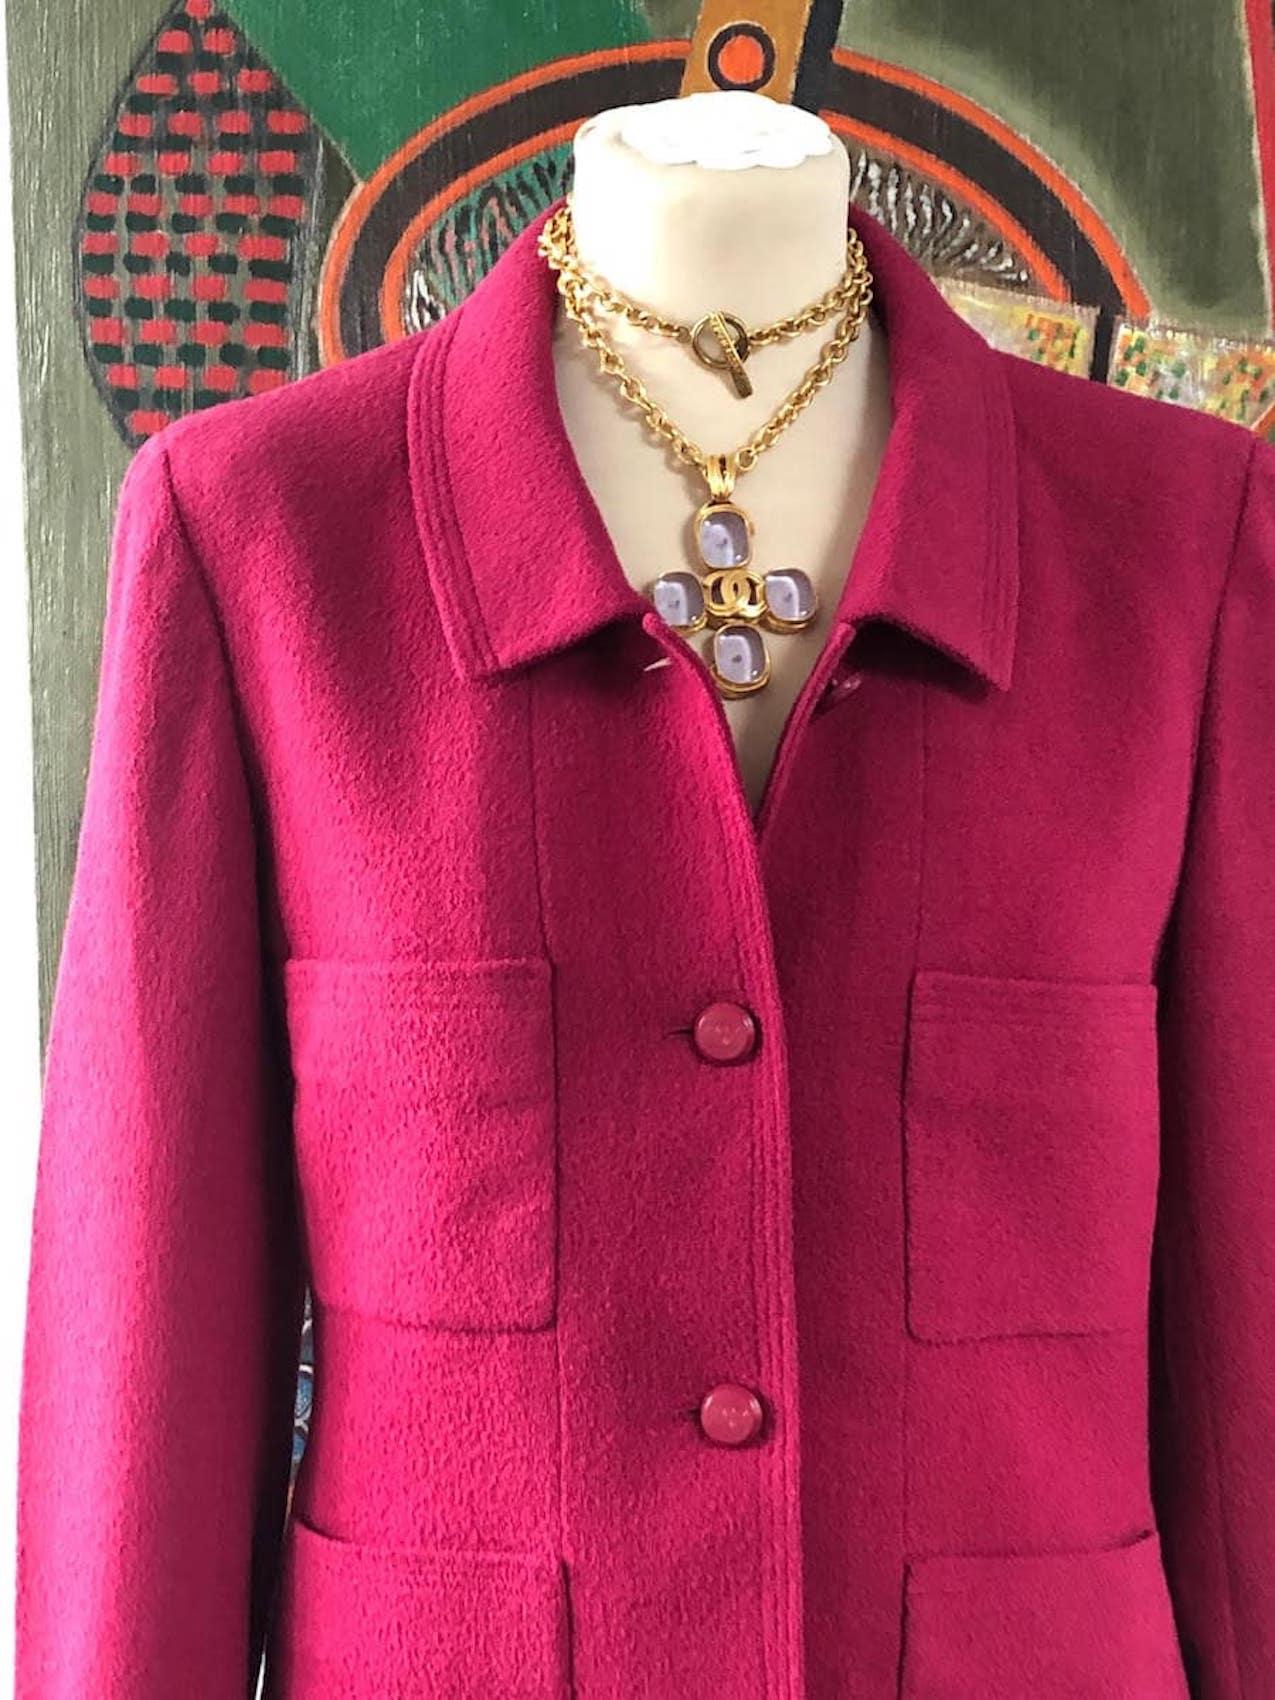 CHANEL 1998 Wool Jacket Tweed Skirt Suit Pink CC Logo Buttons
A classic stunning vintage Chanel in dark pink, wool bouclé suit skirt and jacket from Autumn 1998 collection. The two-piece set is detailed with CC-logo embossed buttons (the buttons